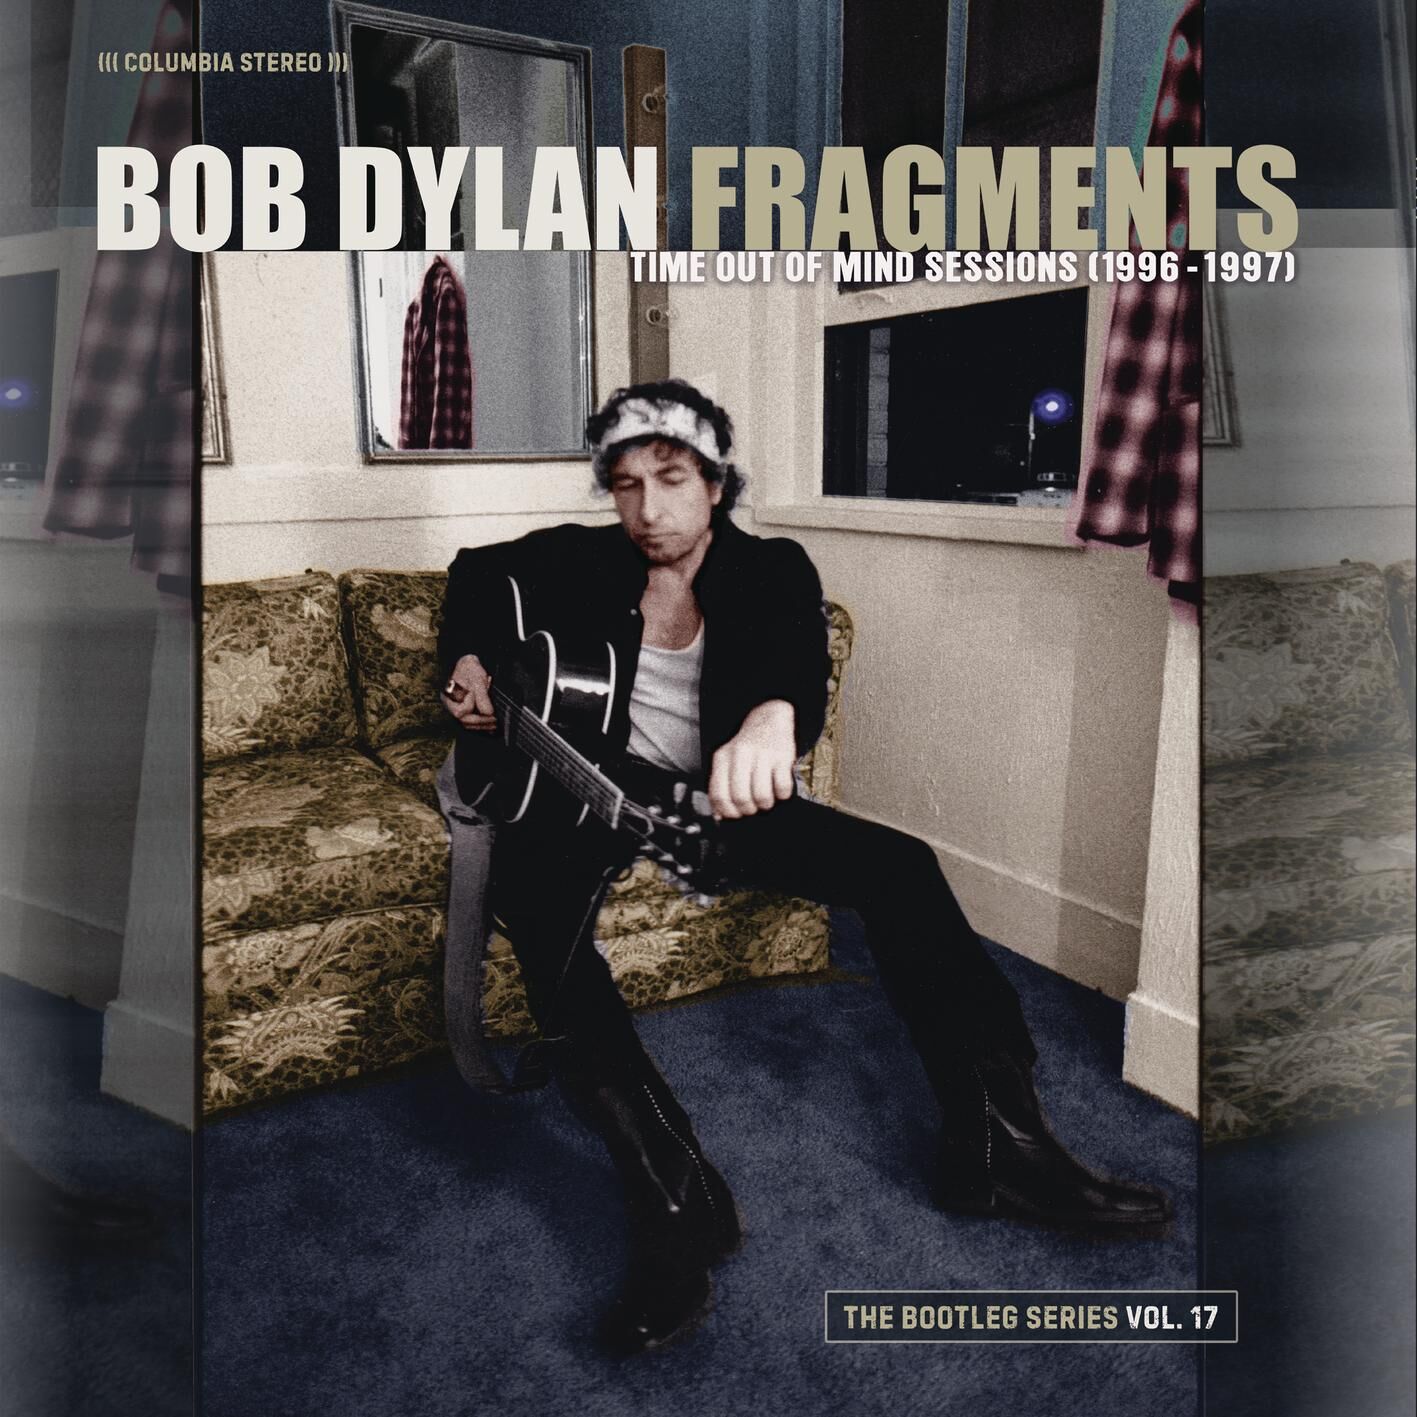 Bob Dylan - 2023 - Fragments Time Out of Mind Sessions 1996-1997 Deluxe Edition [2023] 24-96